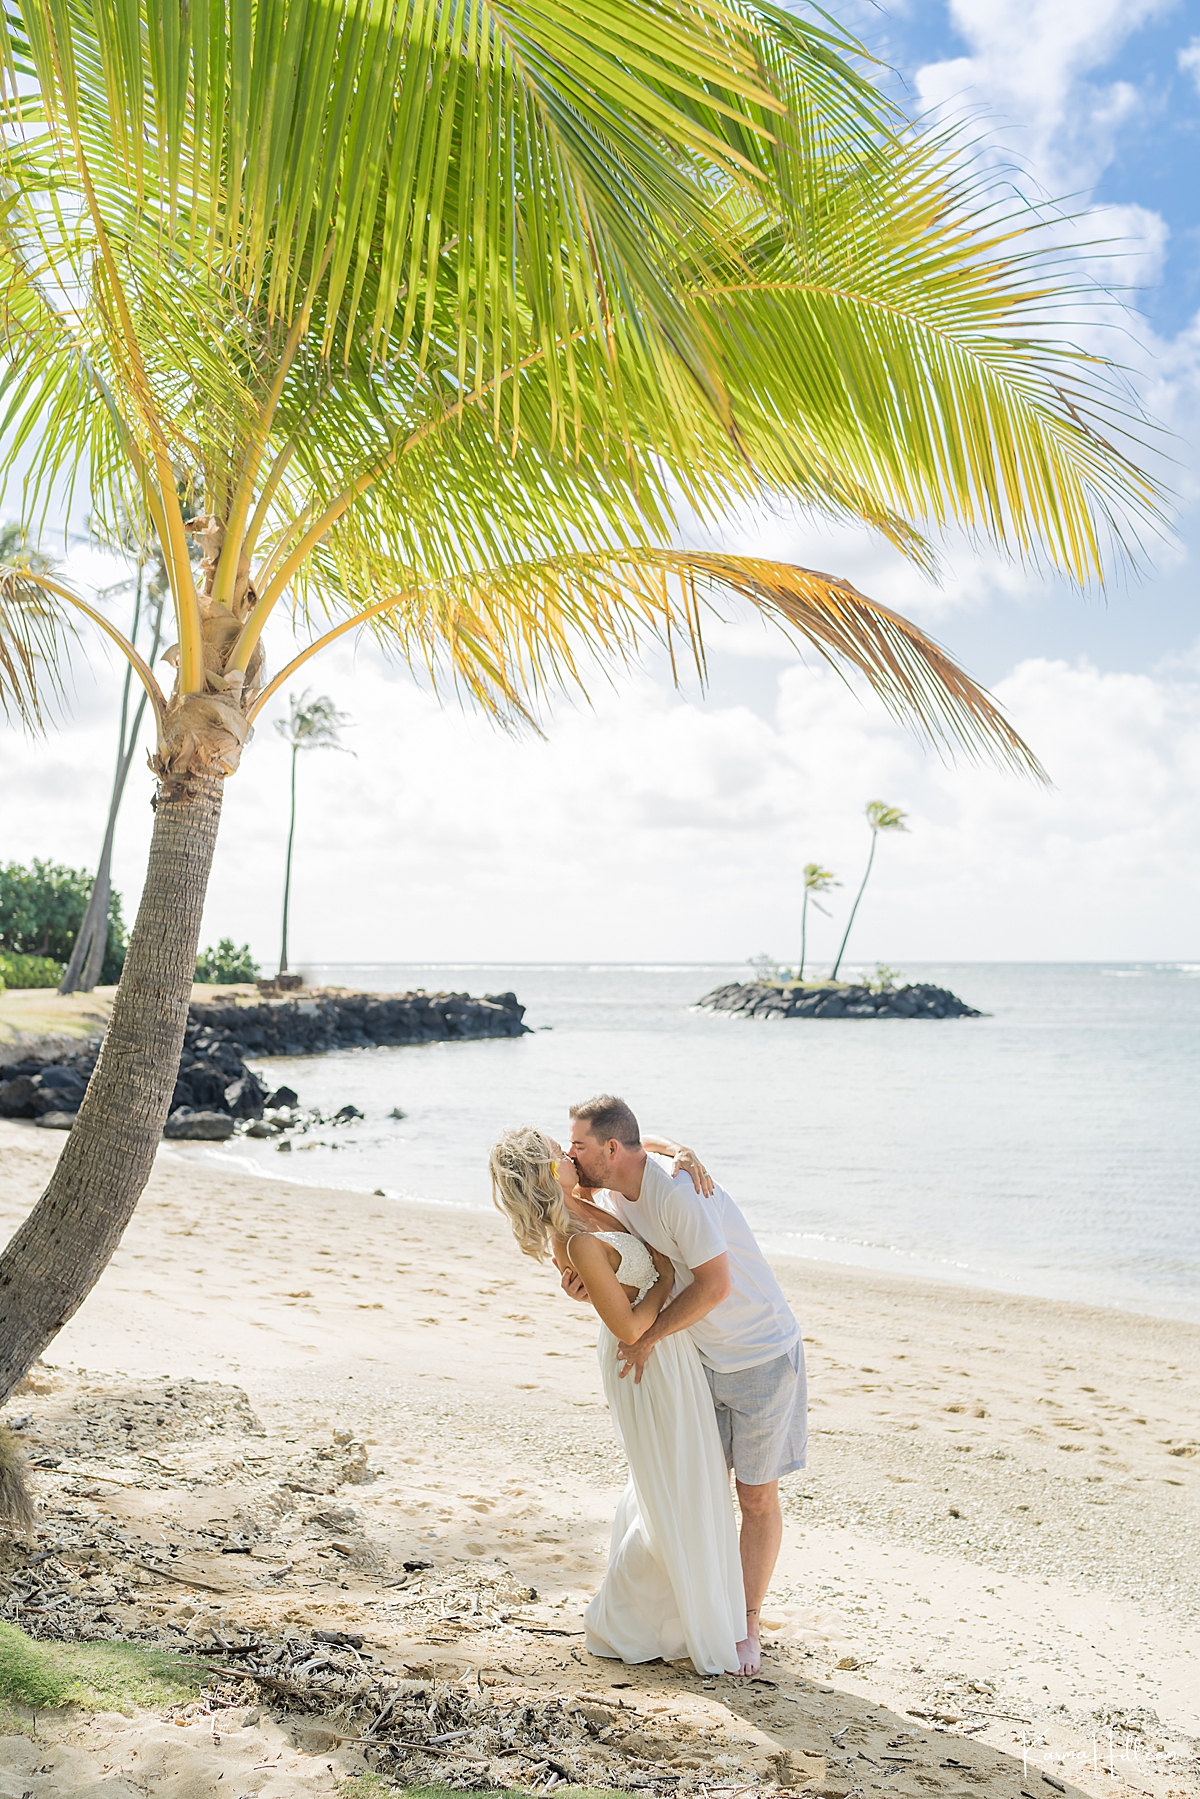 man kisses wife on a hawaii beach with islet in the background and palm trees